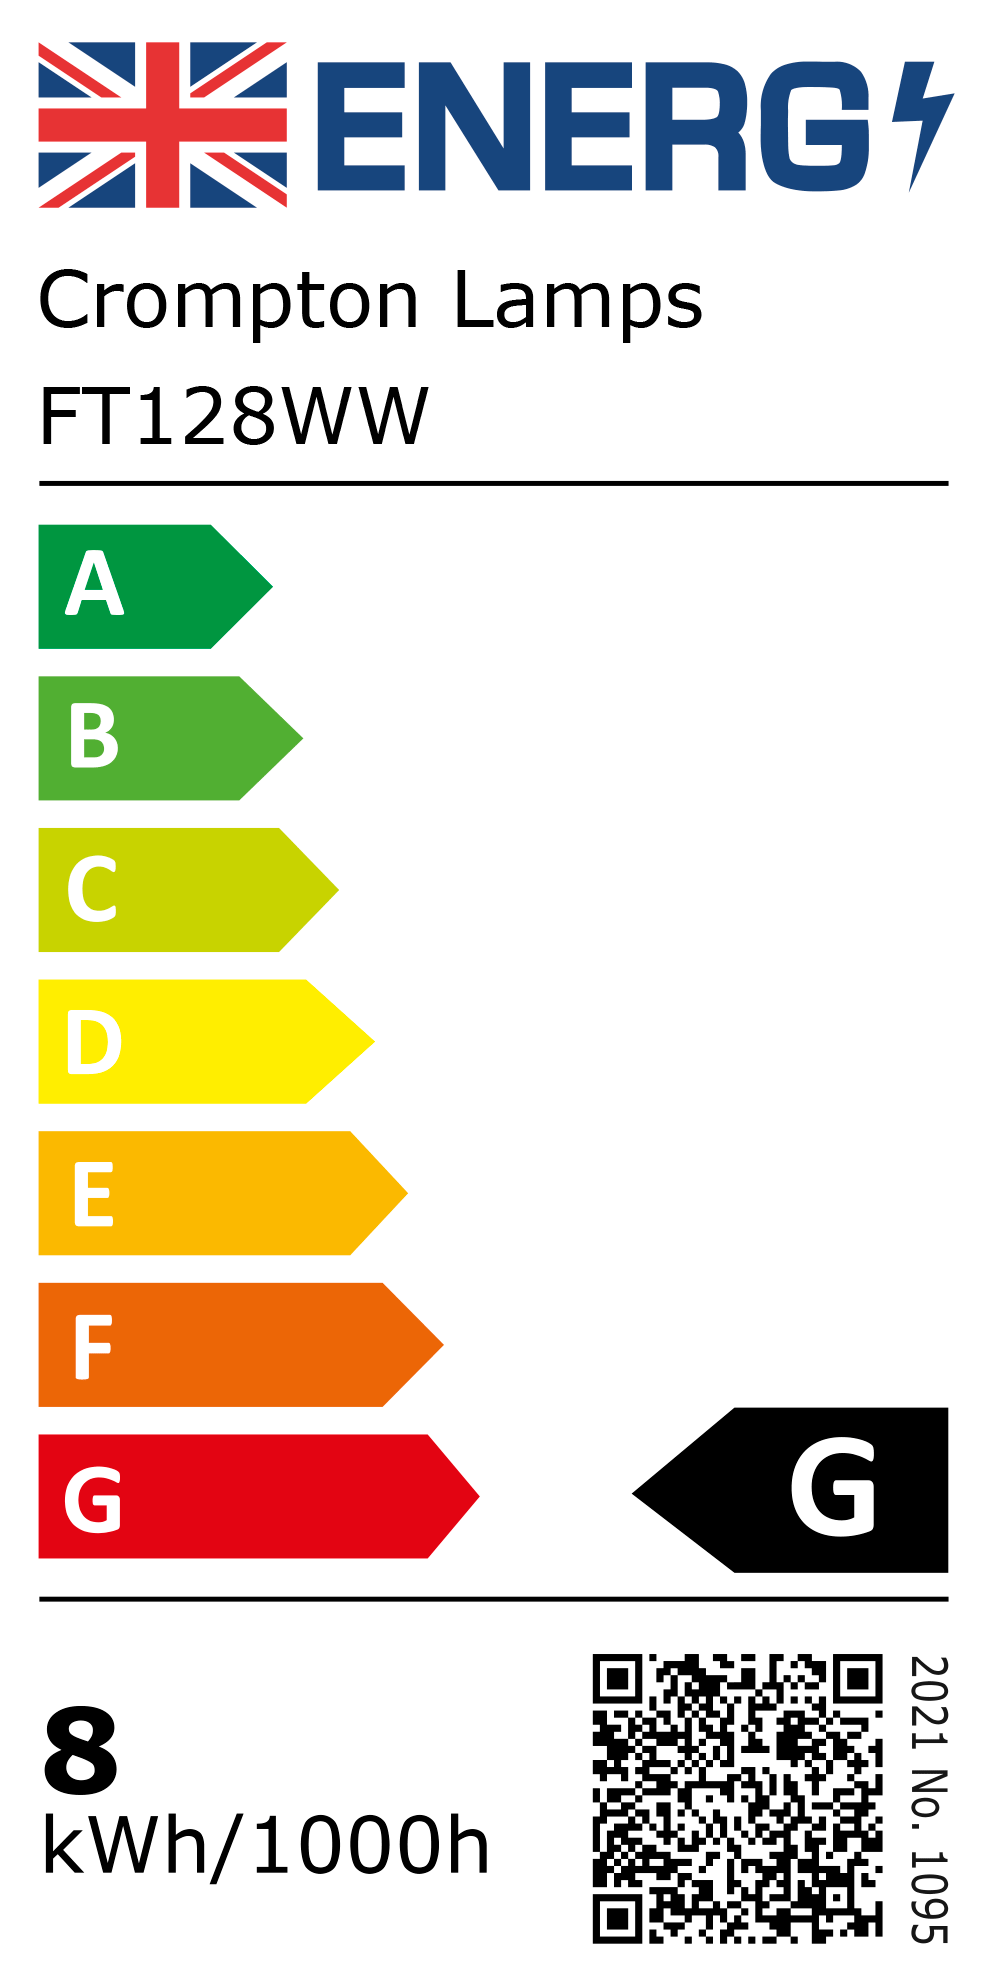 New 2021 Energy Rating Label: Stock Code FT128WW